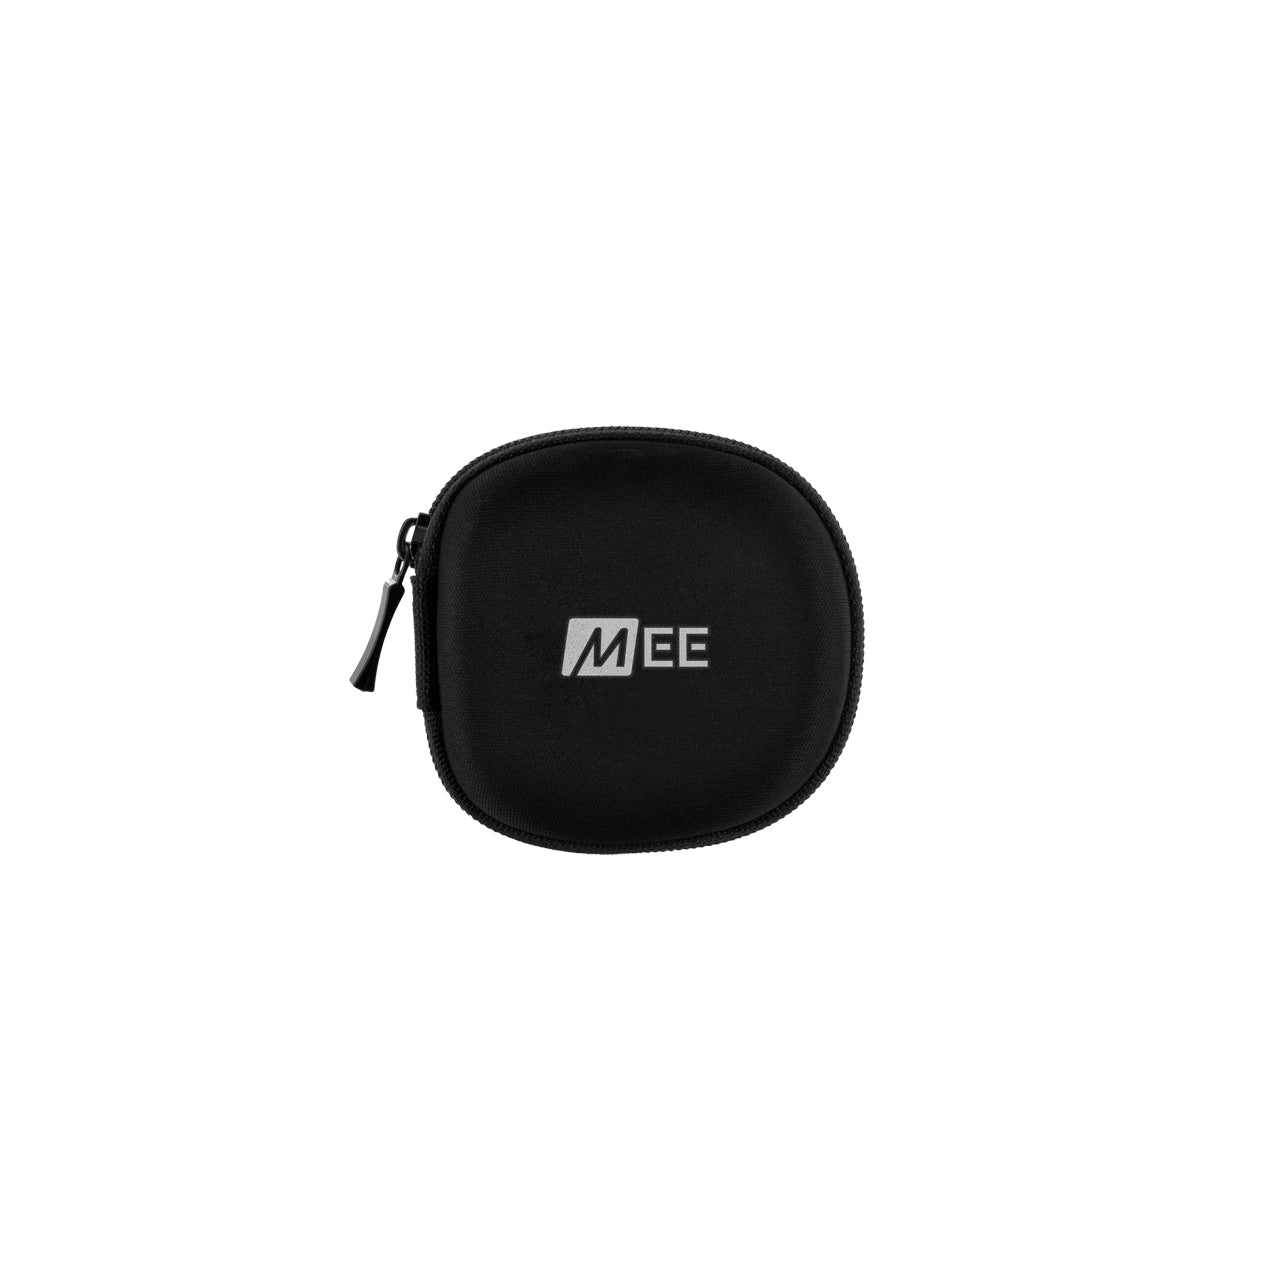 Image of Standard Protective Zippered Carrying Case for Earphones.